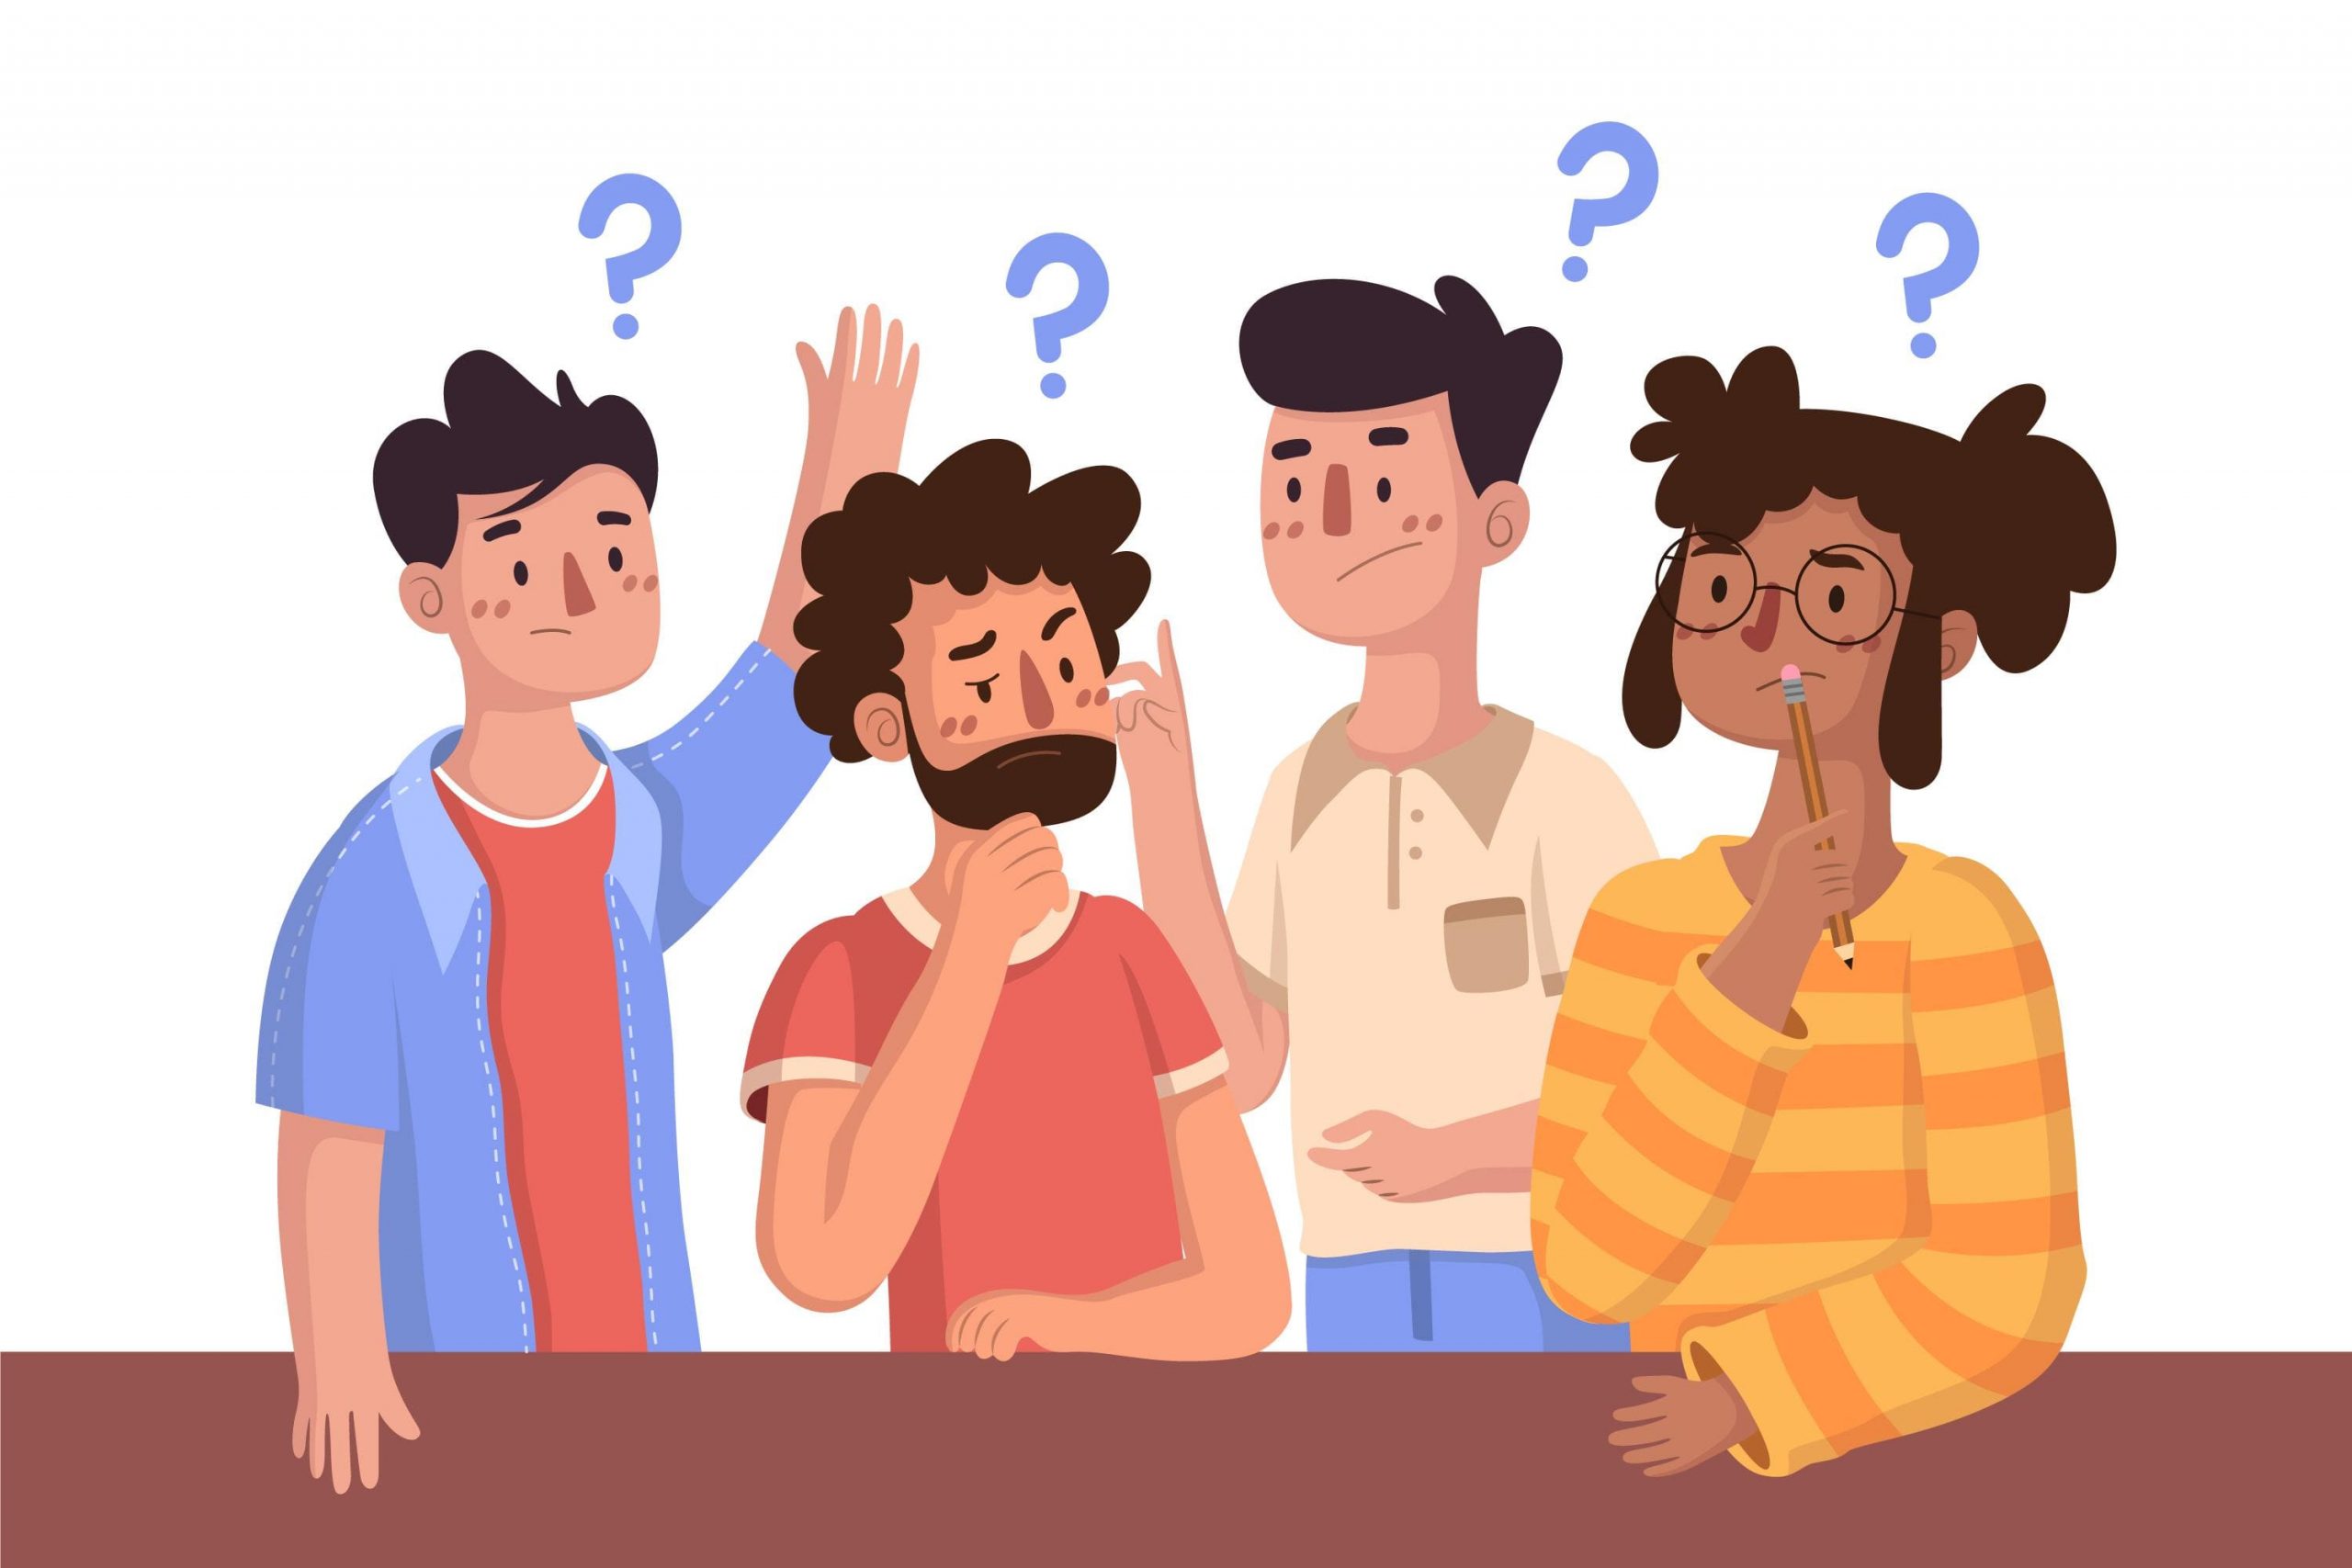 People also like. FAQ иллюстрация. Asking questions. Question illustration. Questions and answers illustration.